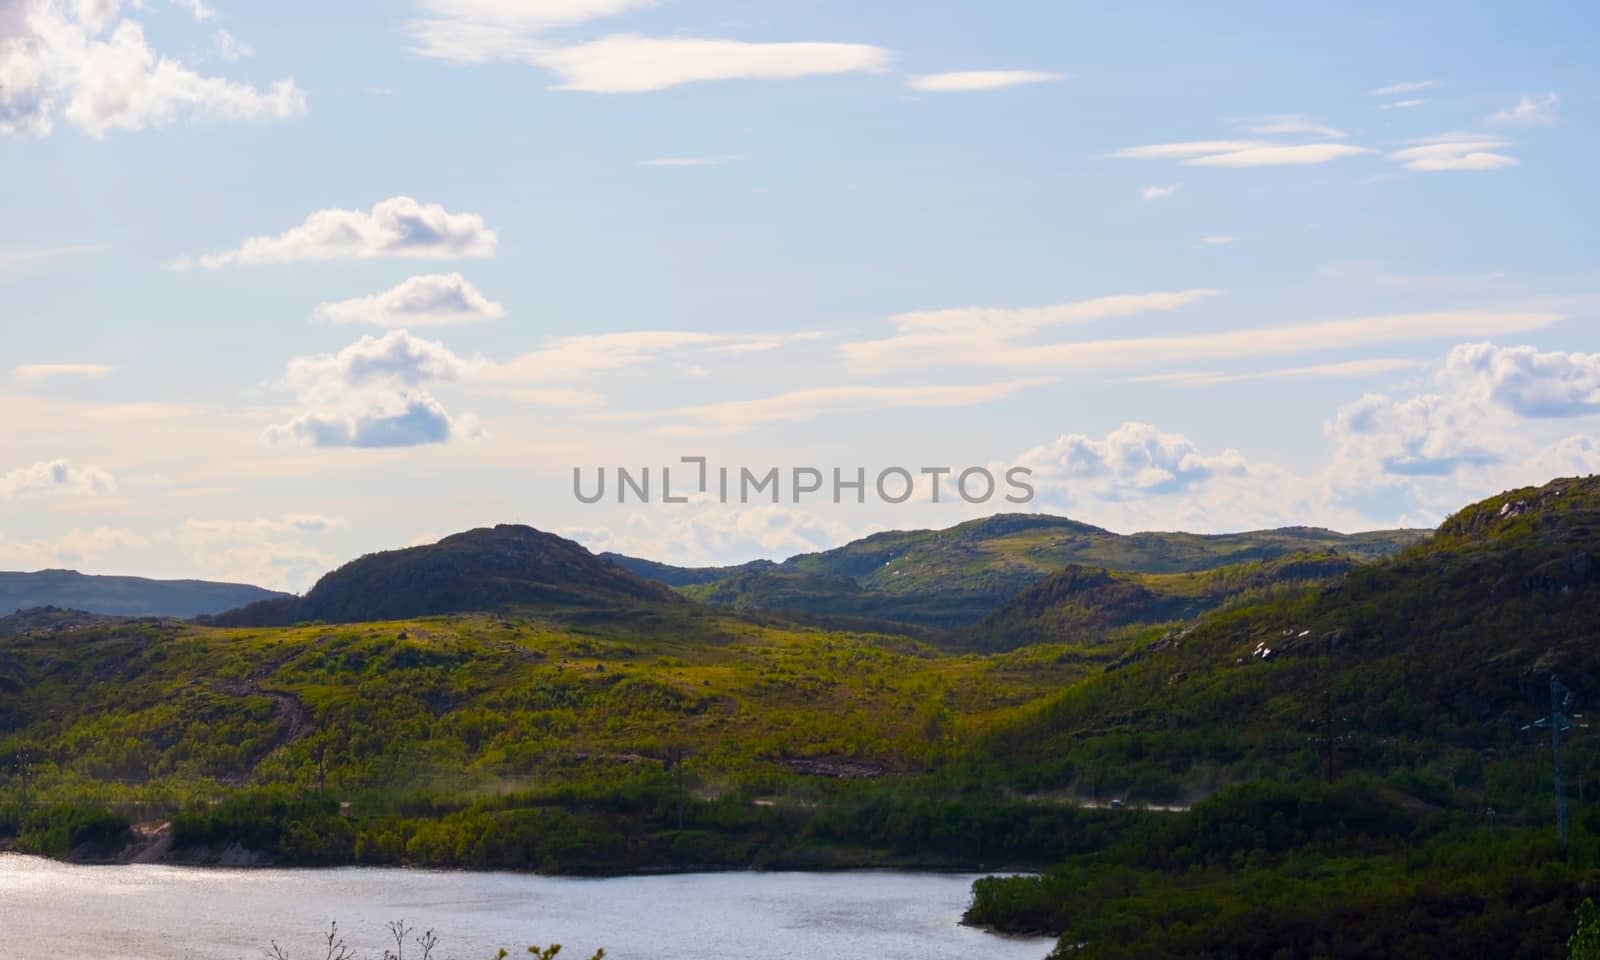 Green hills under a low, deep Northern sky and peacefull lake. These places in the Murmansk region are not far from Teriberka. Clouds fly over the trees and hills. Quiet and peaceful landscape